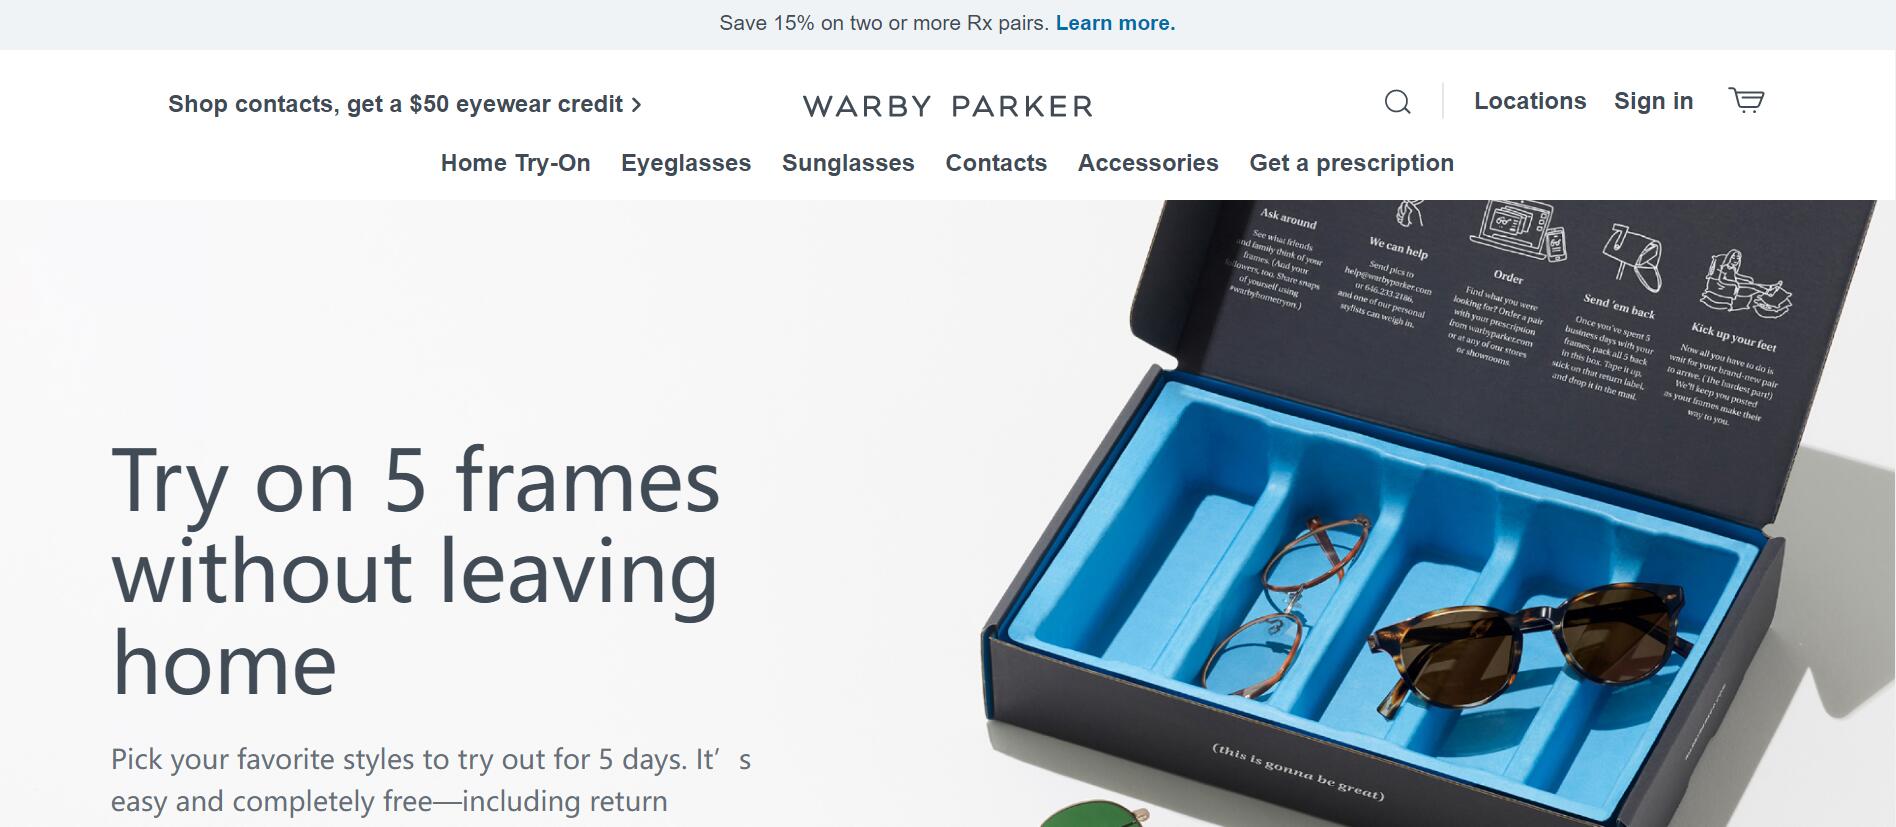 Warby Parker FY2022 Net Income Rose 10.6% to $598.1 Million, with Average Revenue per Customer Rising 6.9% to $263